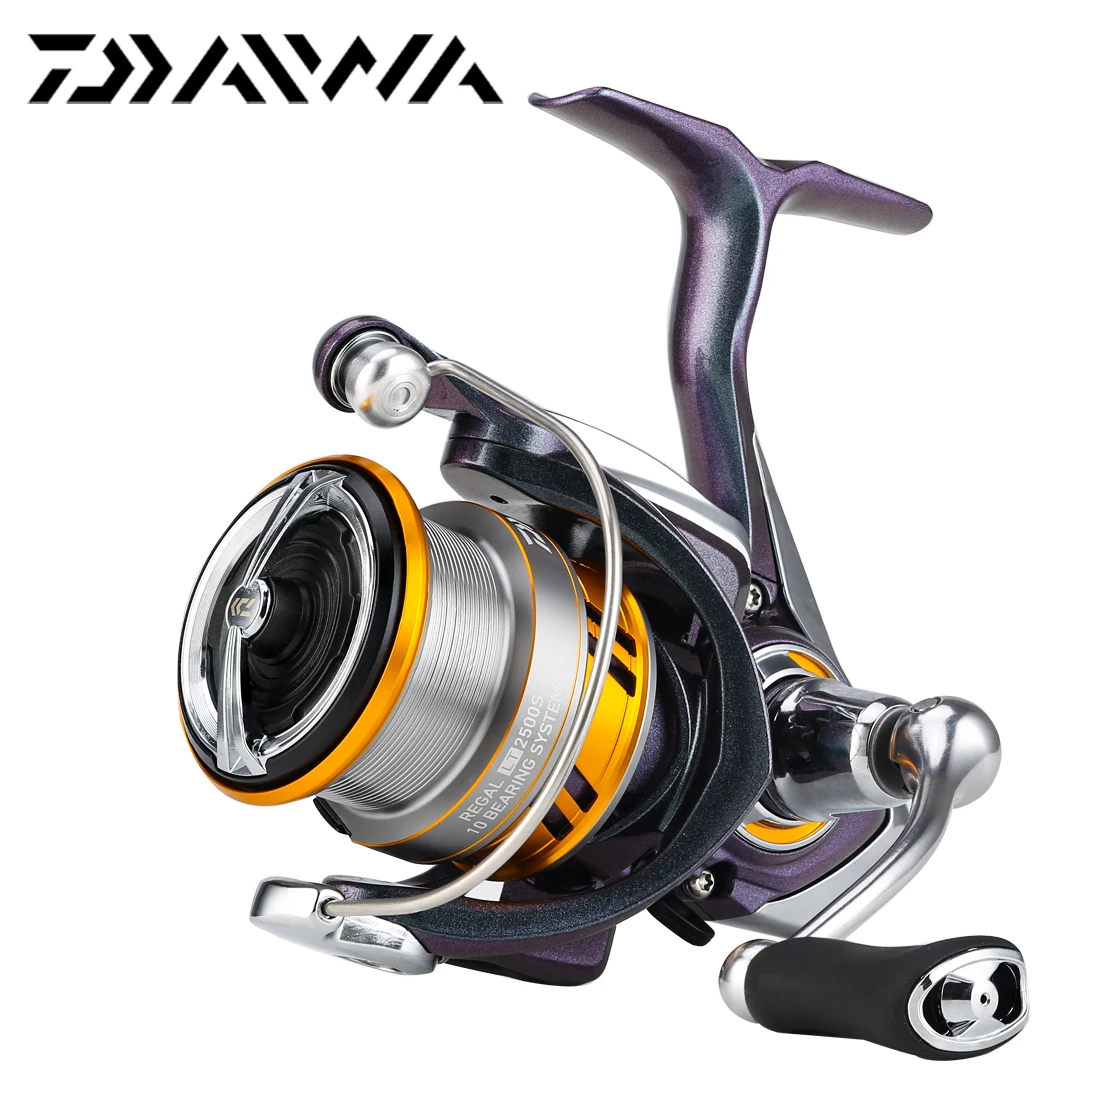 

DAIWA REGAL LT 1000S 2000S 2500S 3000S-C 3000D-CXH Spinning Fishing Reel LC-ABS ATD Shallow Deep Reel Saltwater Fishing Tackle